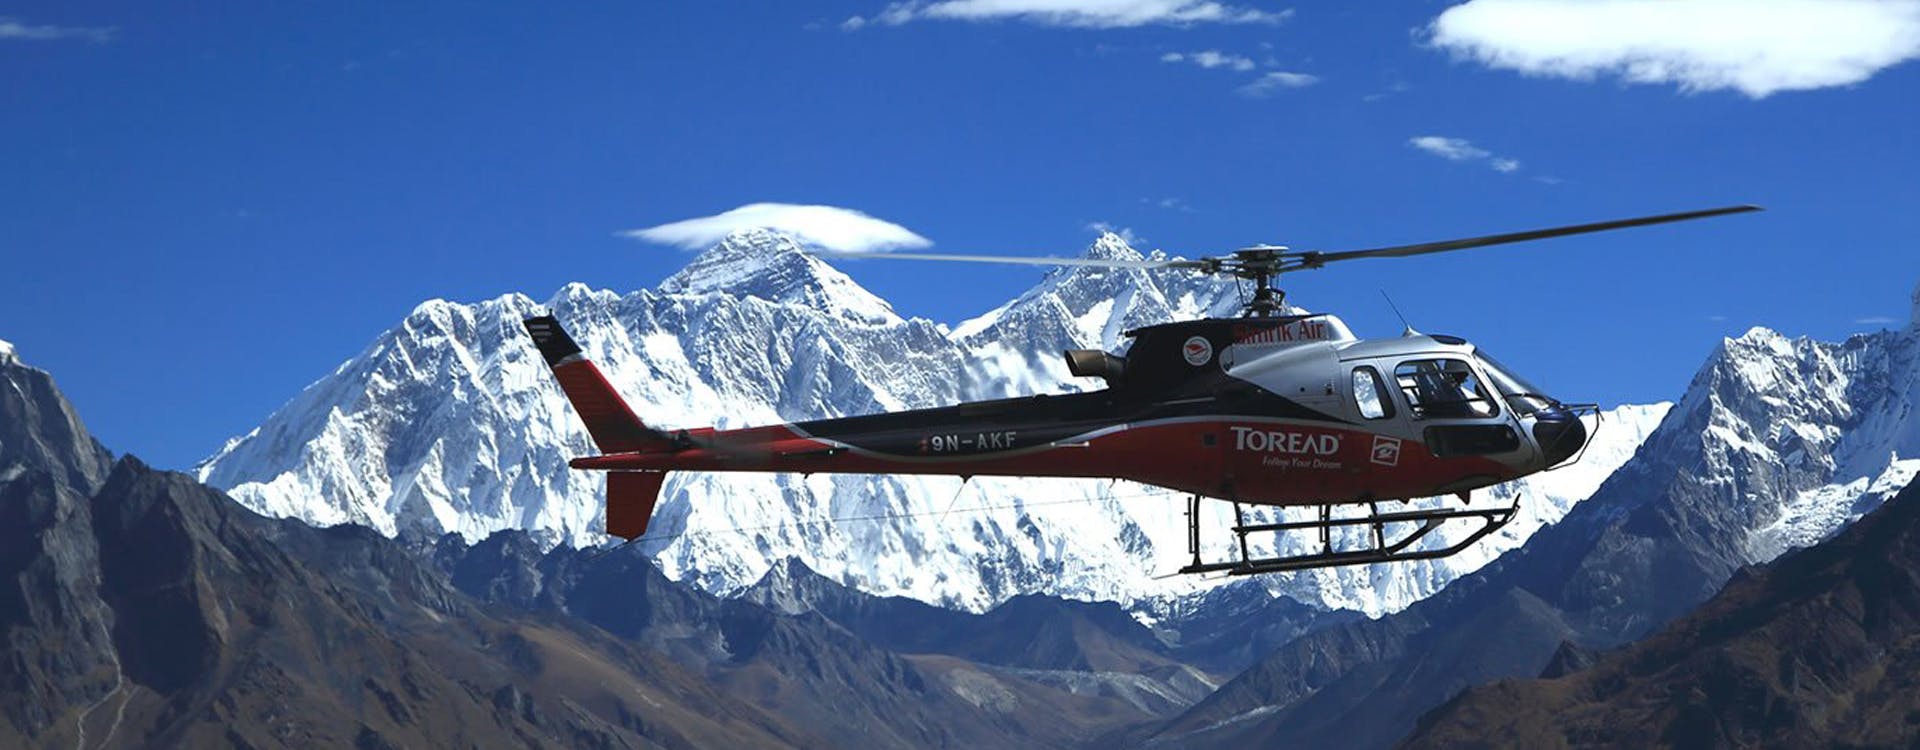 Everest Helicopter Tours